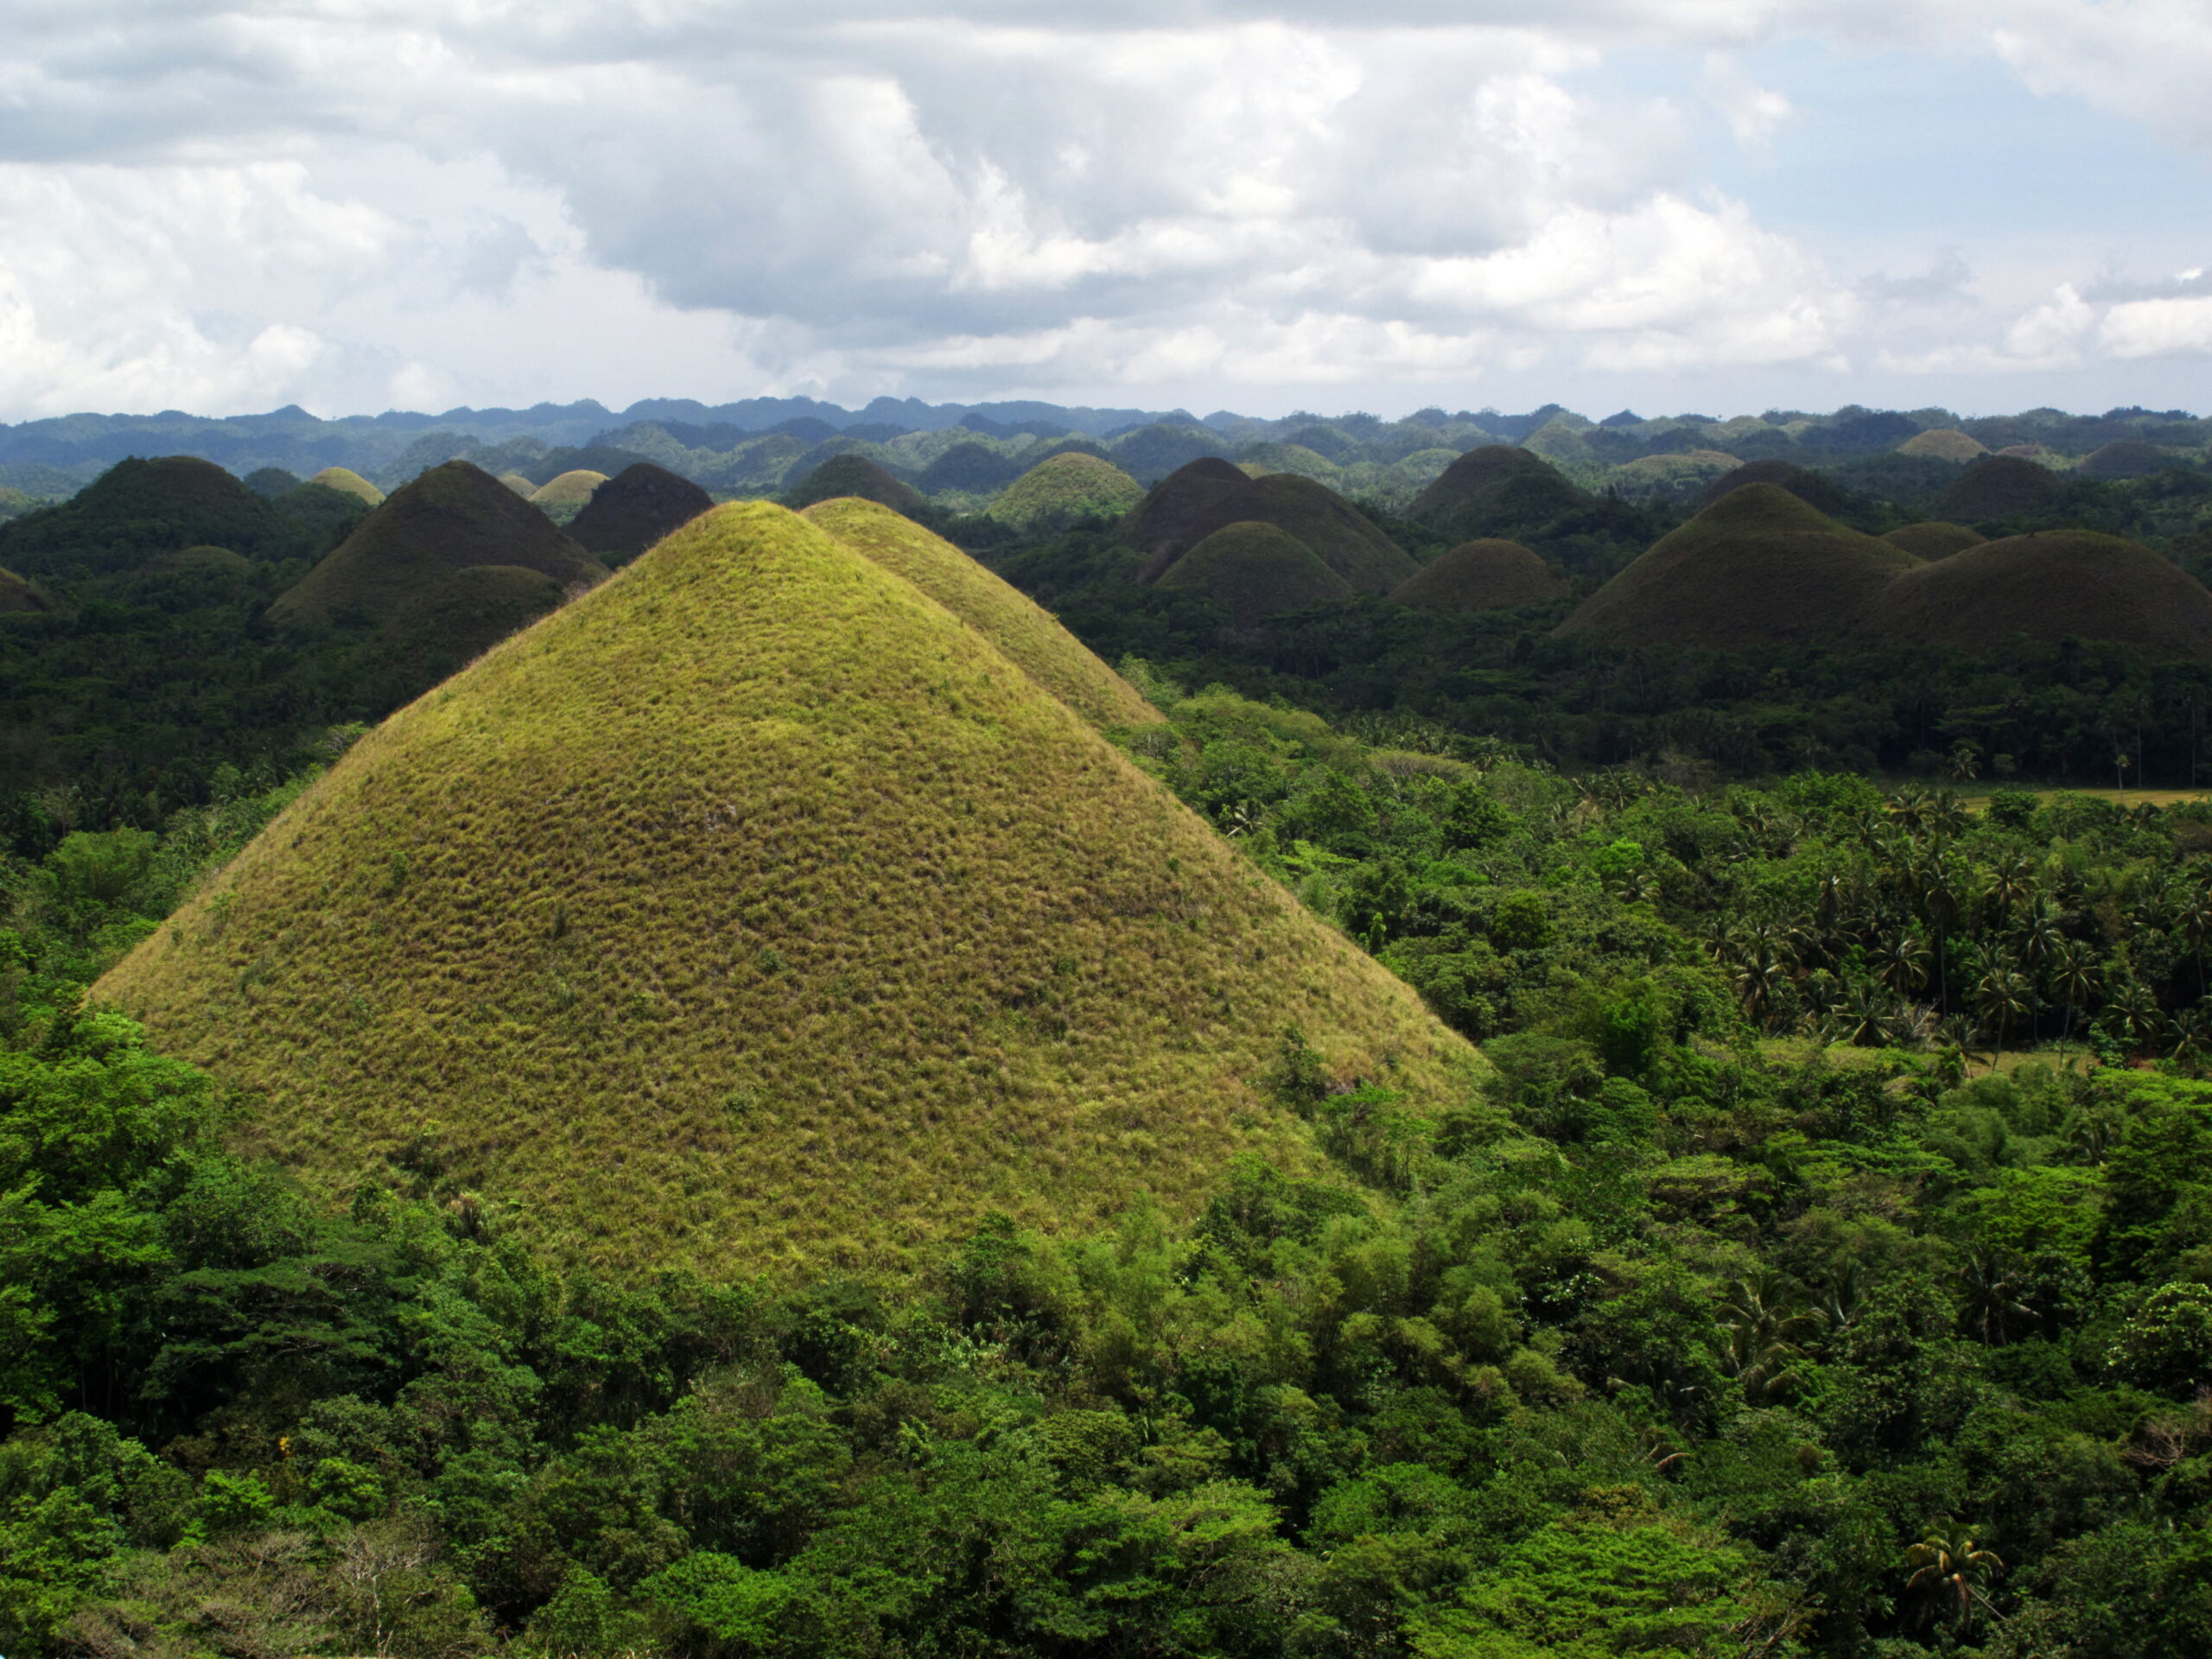 558 Chocolate Hills establishments without required documents – DENR